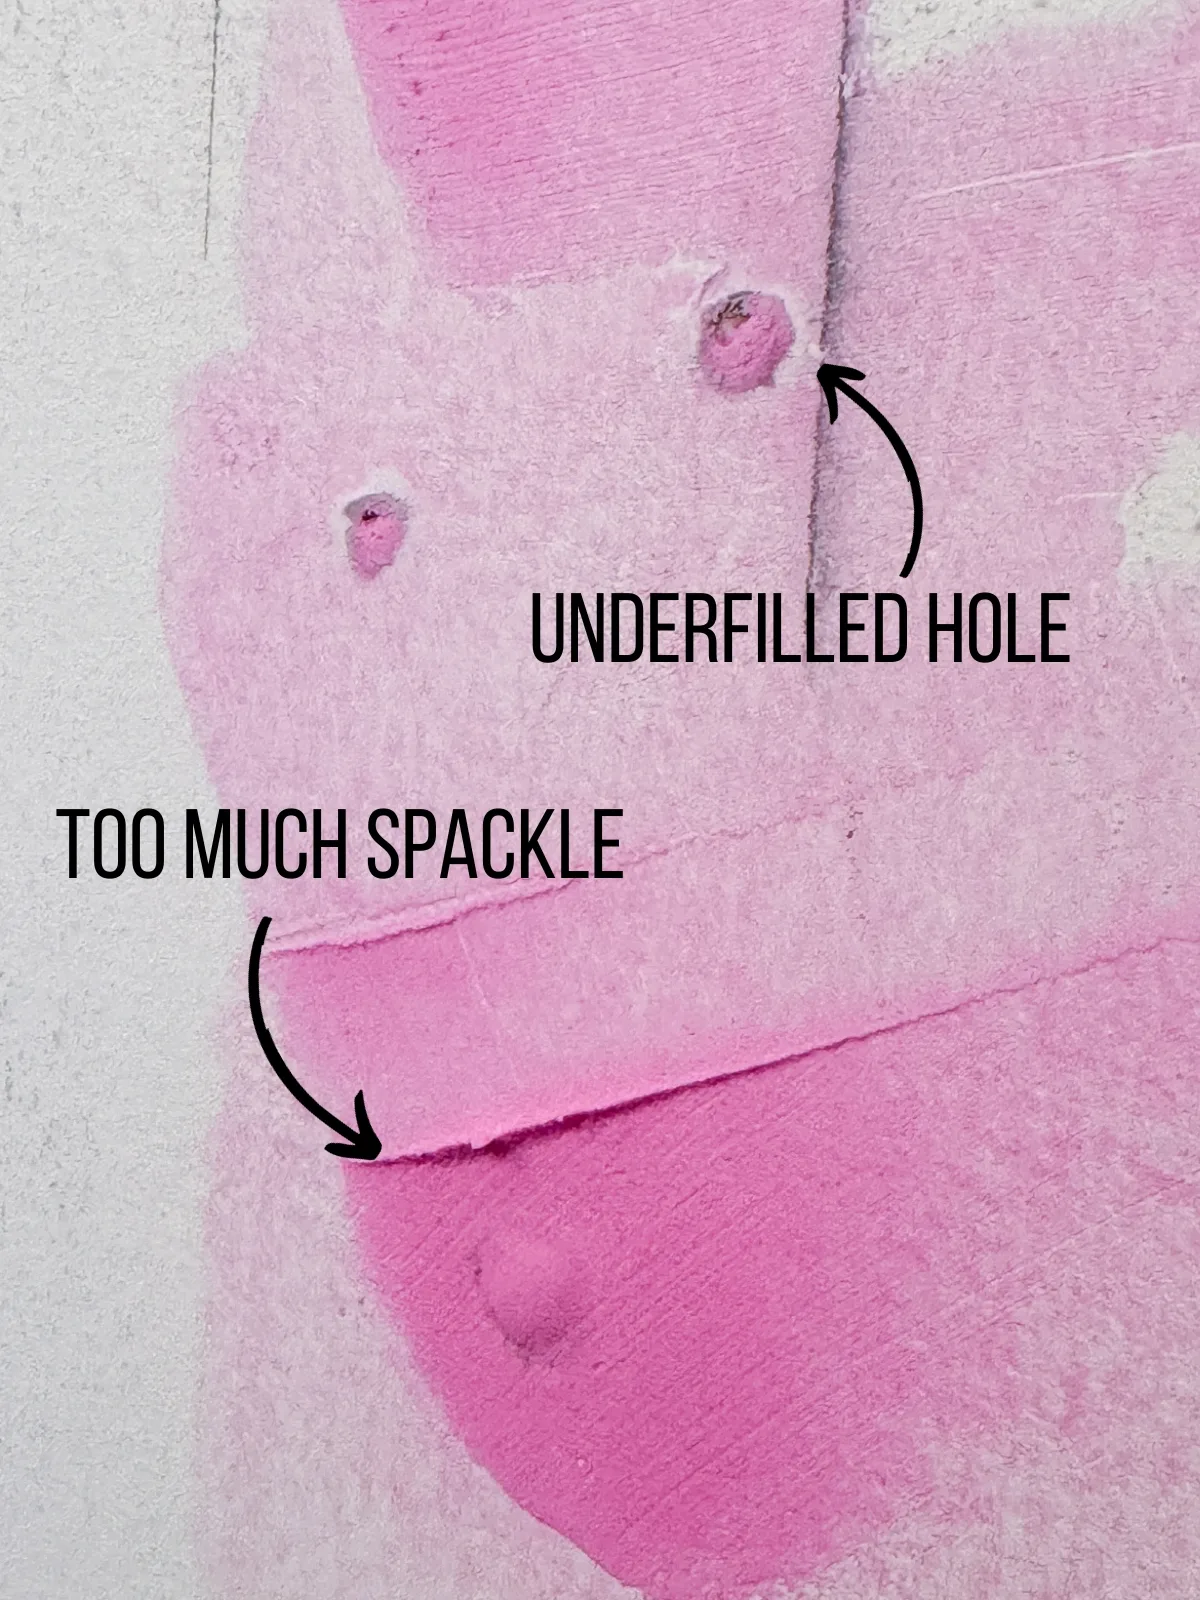 underfilled vs overfilled holes in drywall